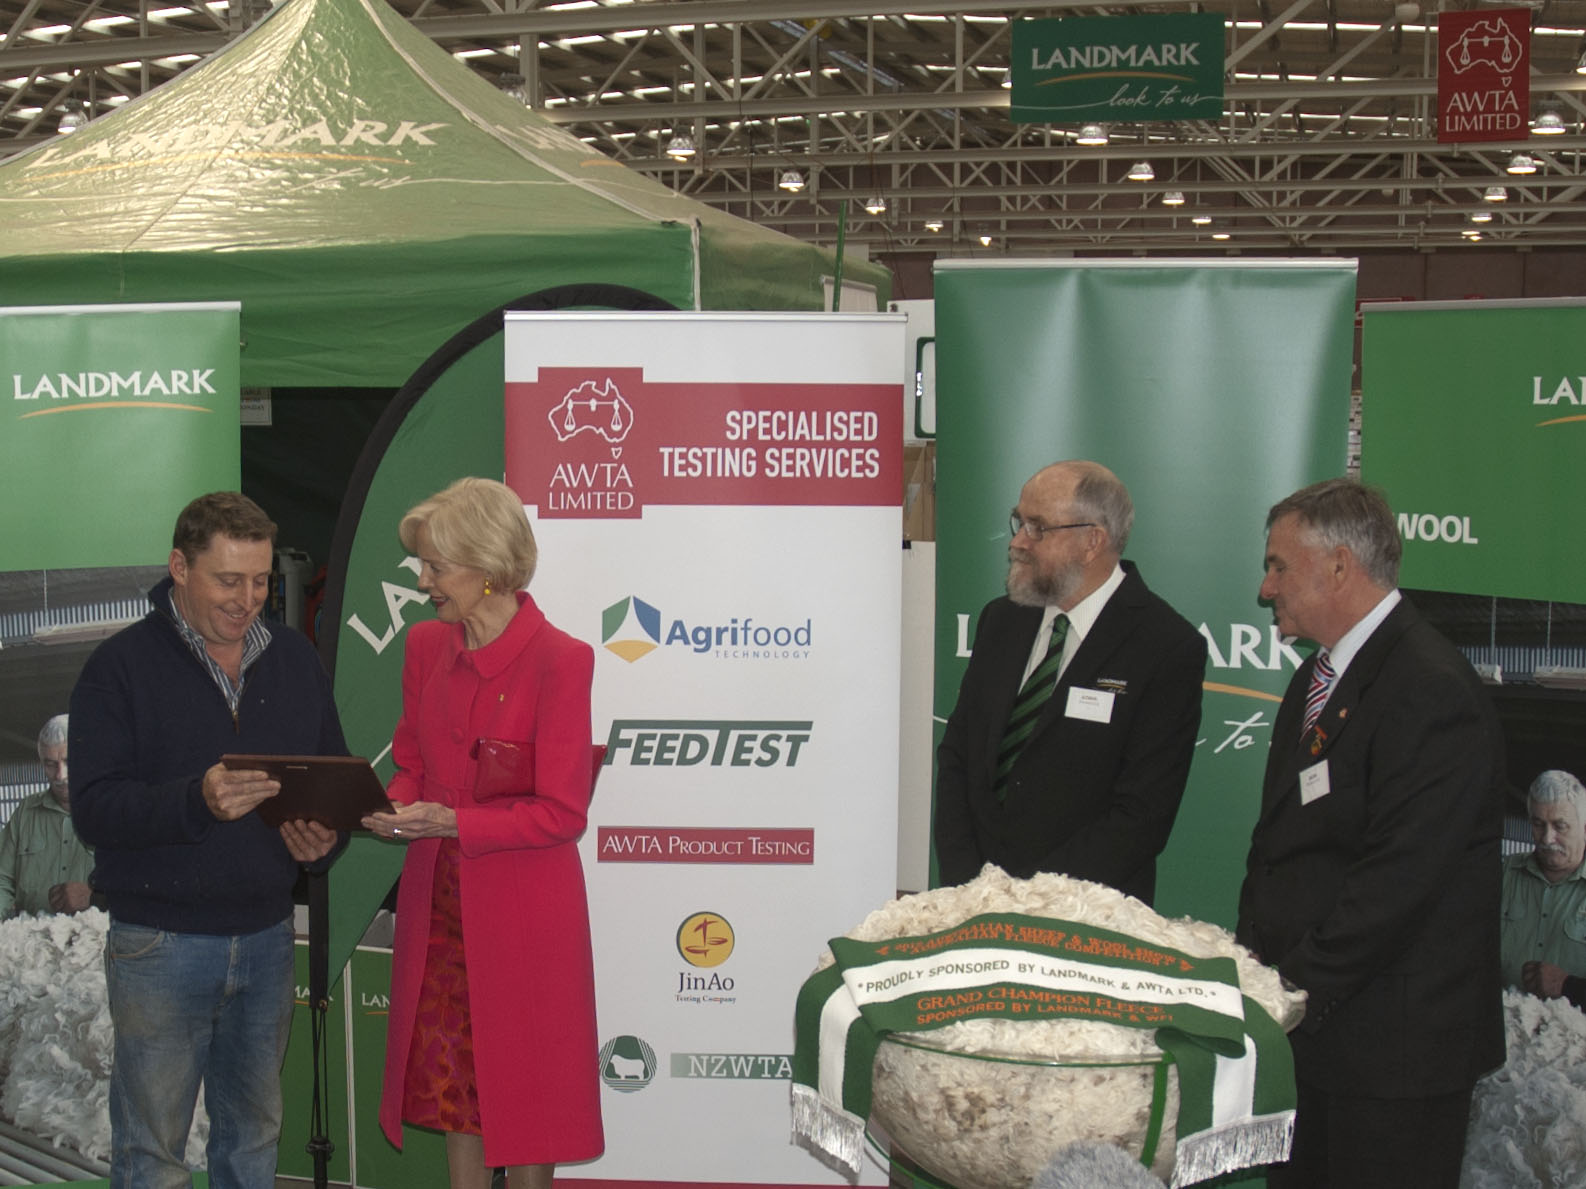 Her Excellency Ms Quentin Bryce AC CVO, Governor-General of the Commonwealth of Australia presents the prize to last year's winner, Michael Corkhill of Grassy Creek Merino Stud